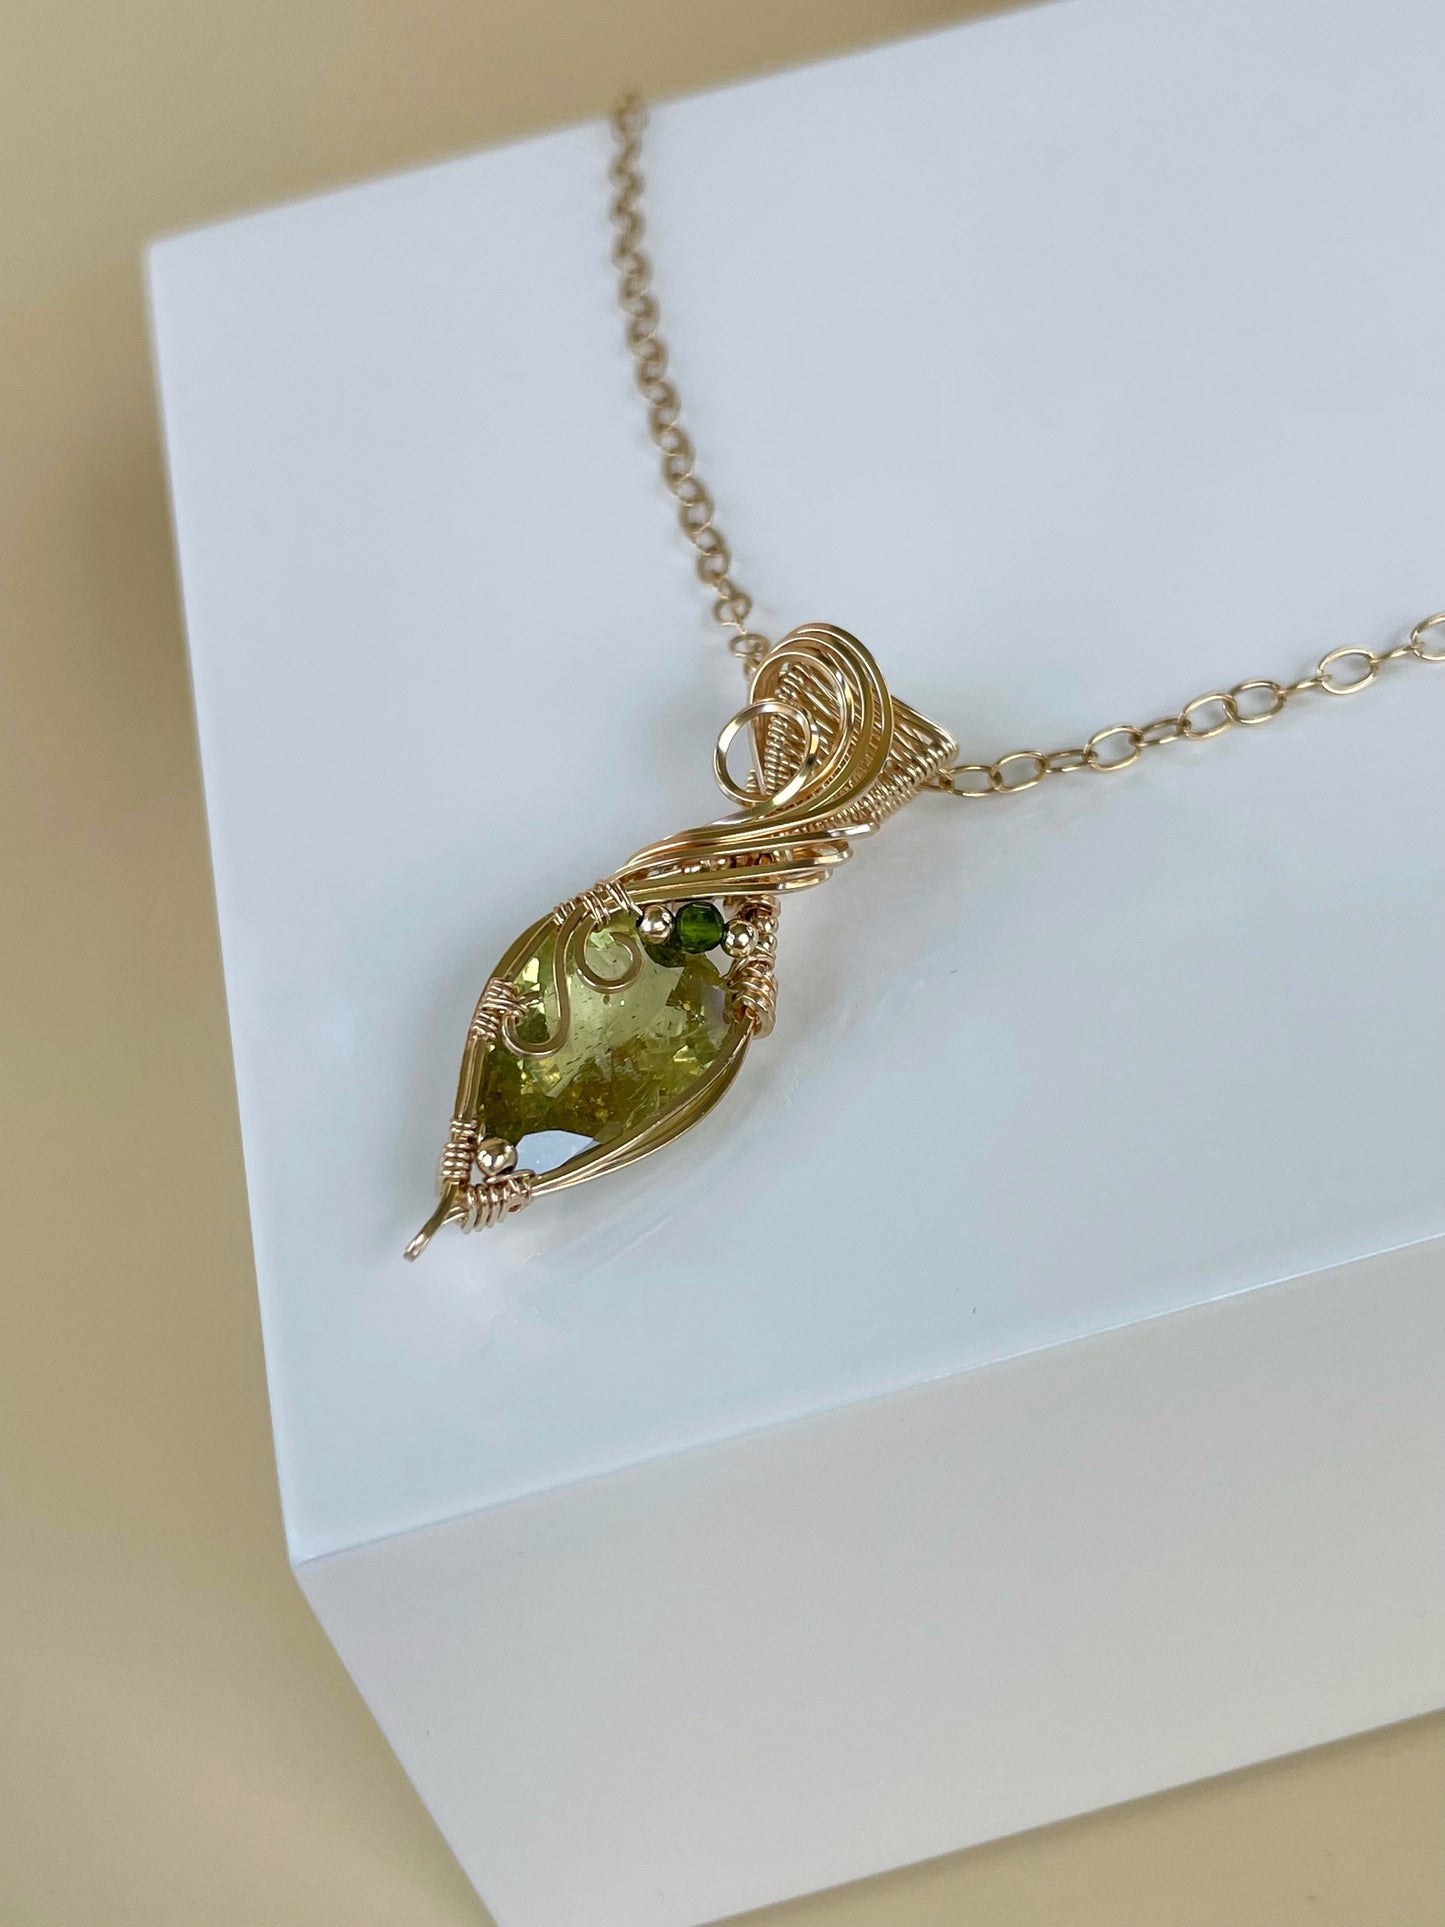 Dainty Yellow/Green Apatite & Green Tourmaline Necklace in 14k Gold Filled